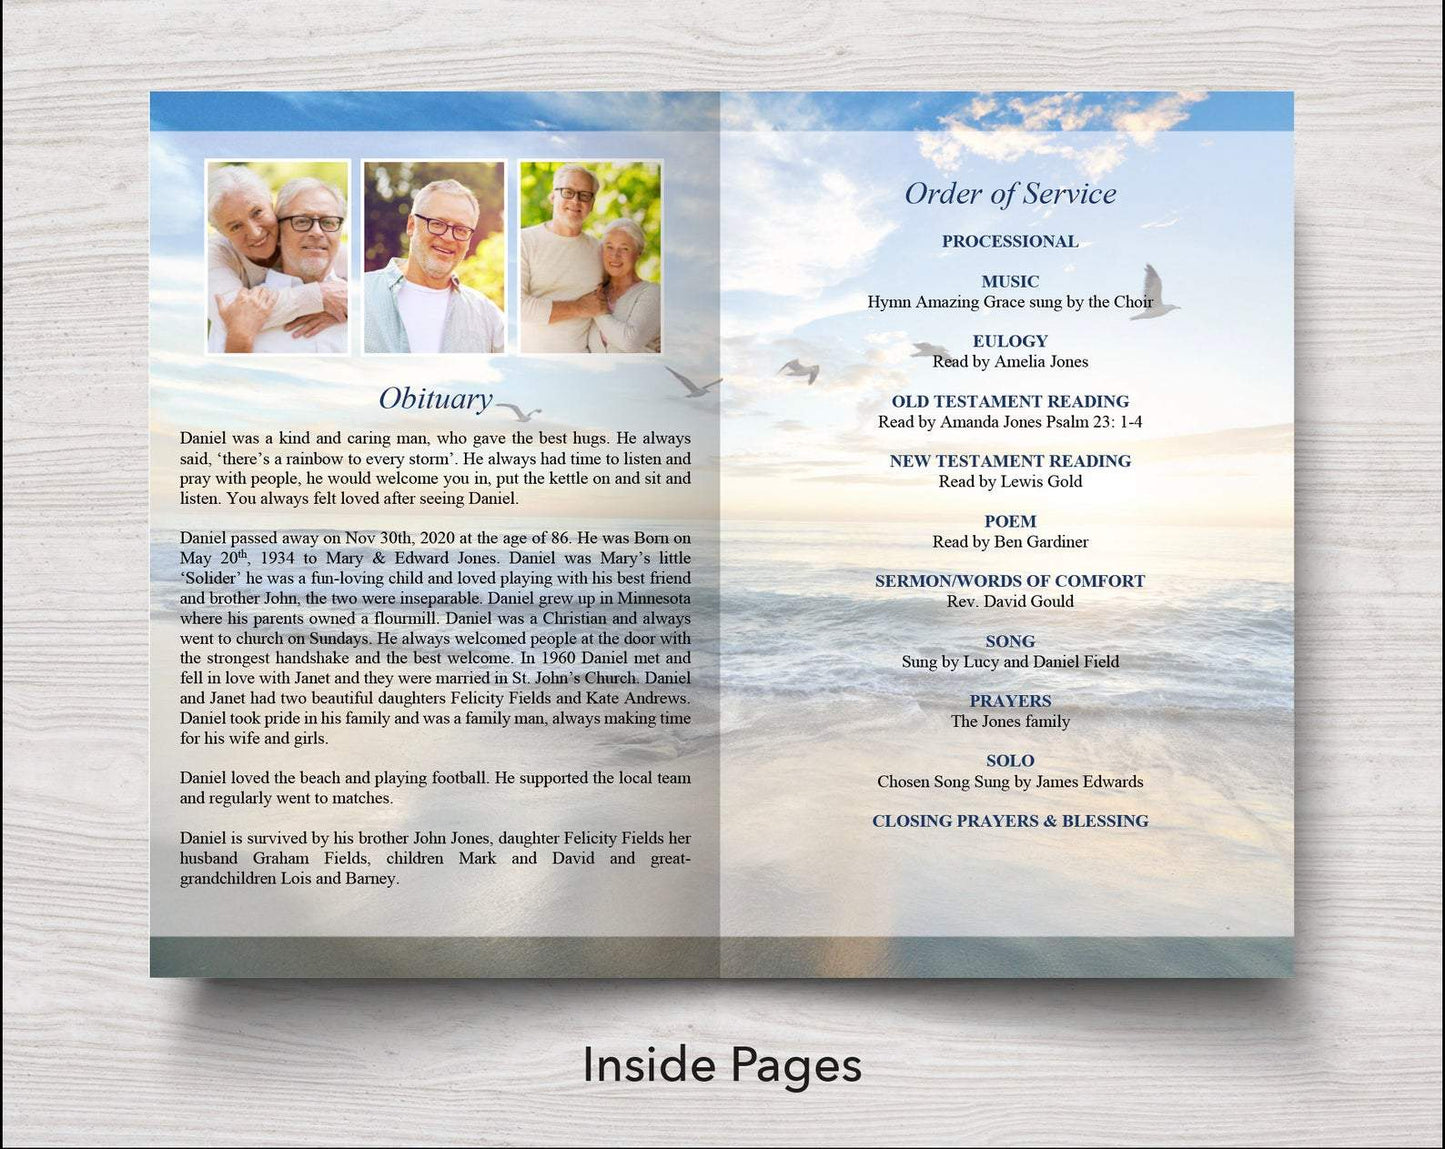 4 Page Beach Funeral Program Template